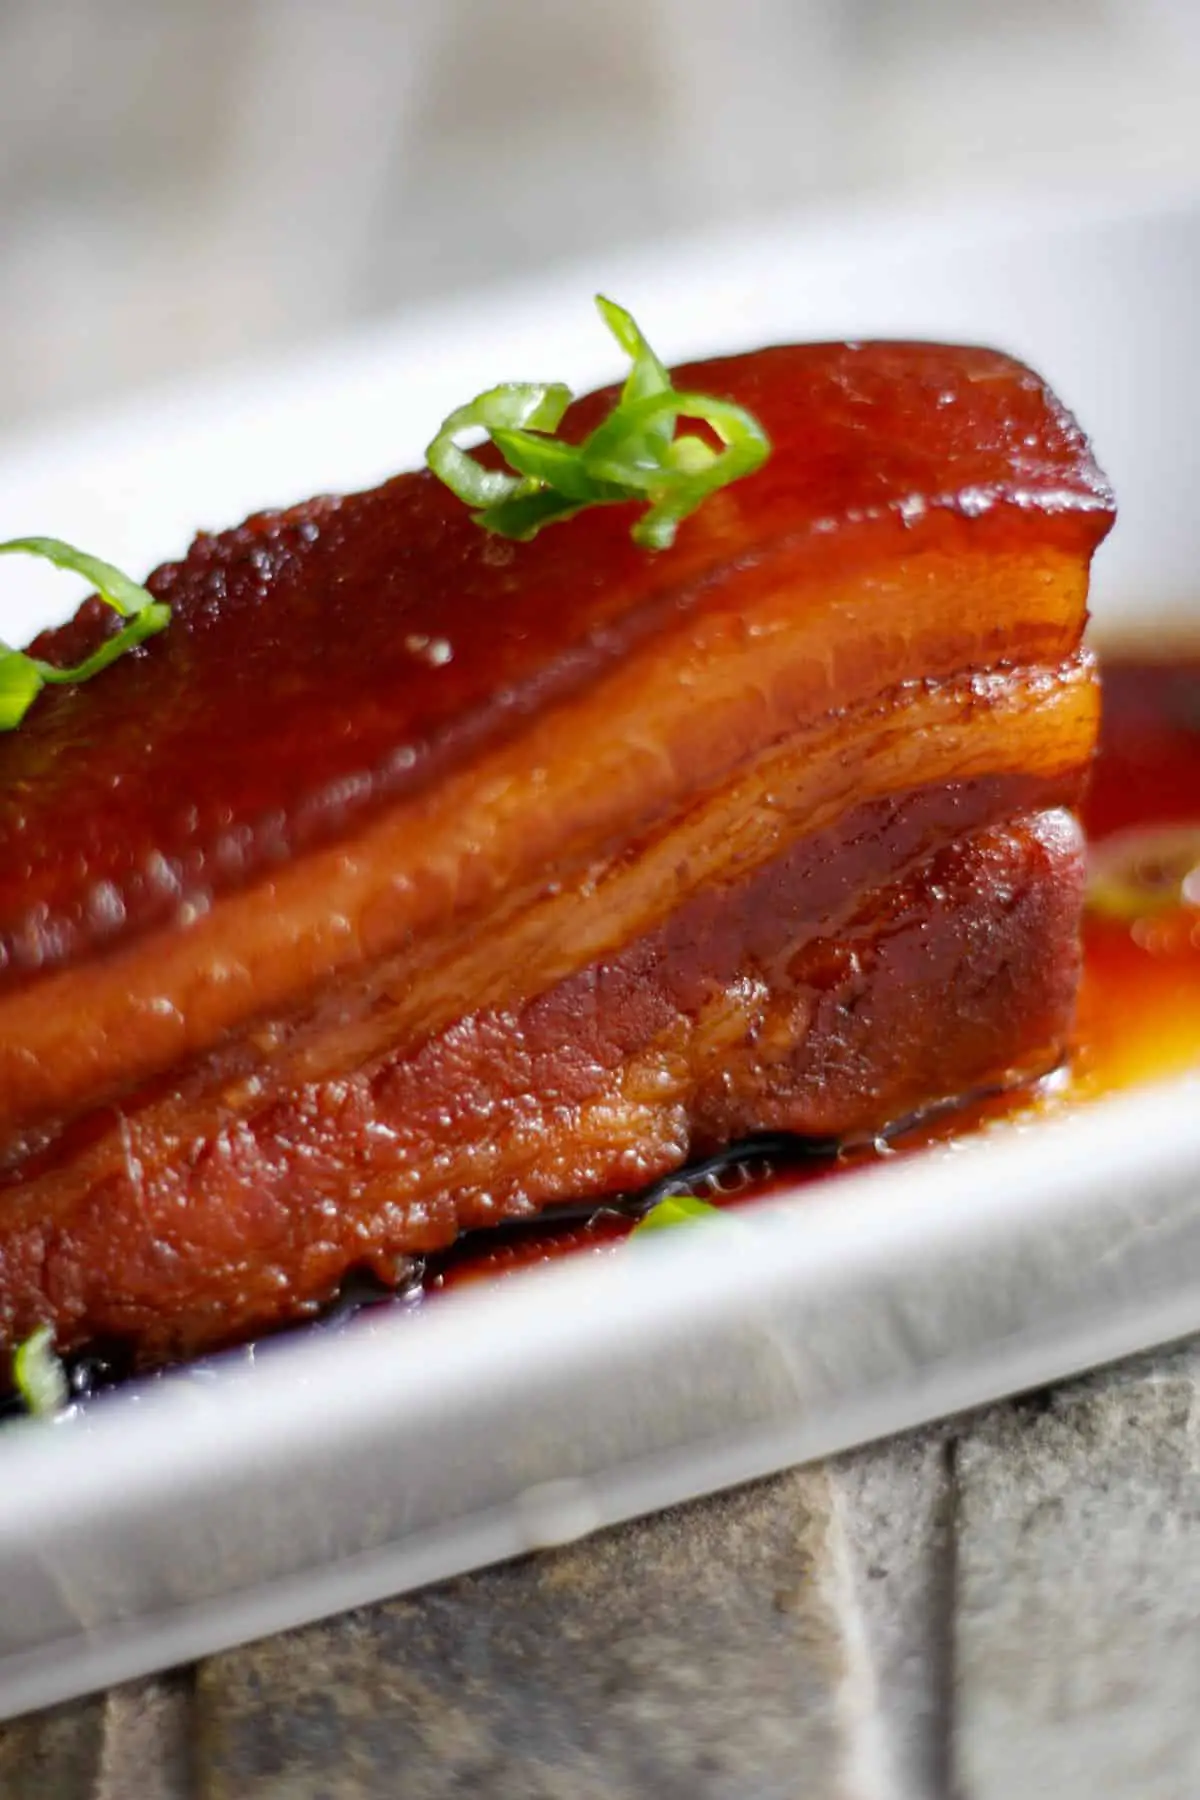 Braised pork belly that is reddish in color on a white dish atop braising sauce and garnished with green onions.